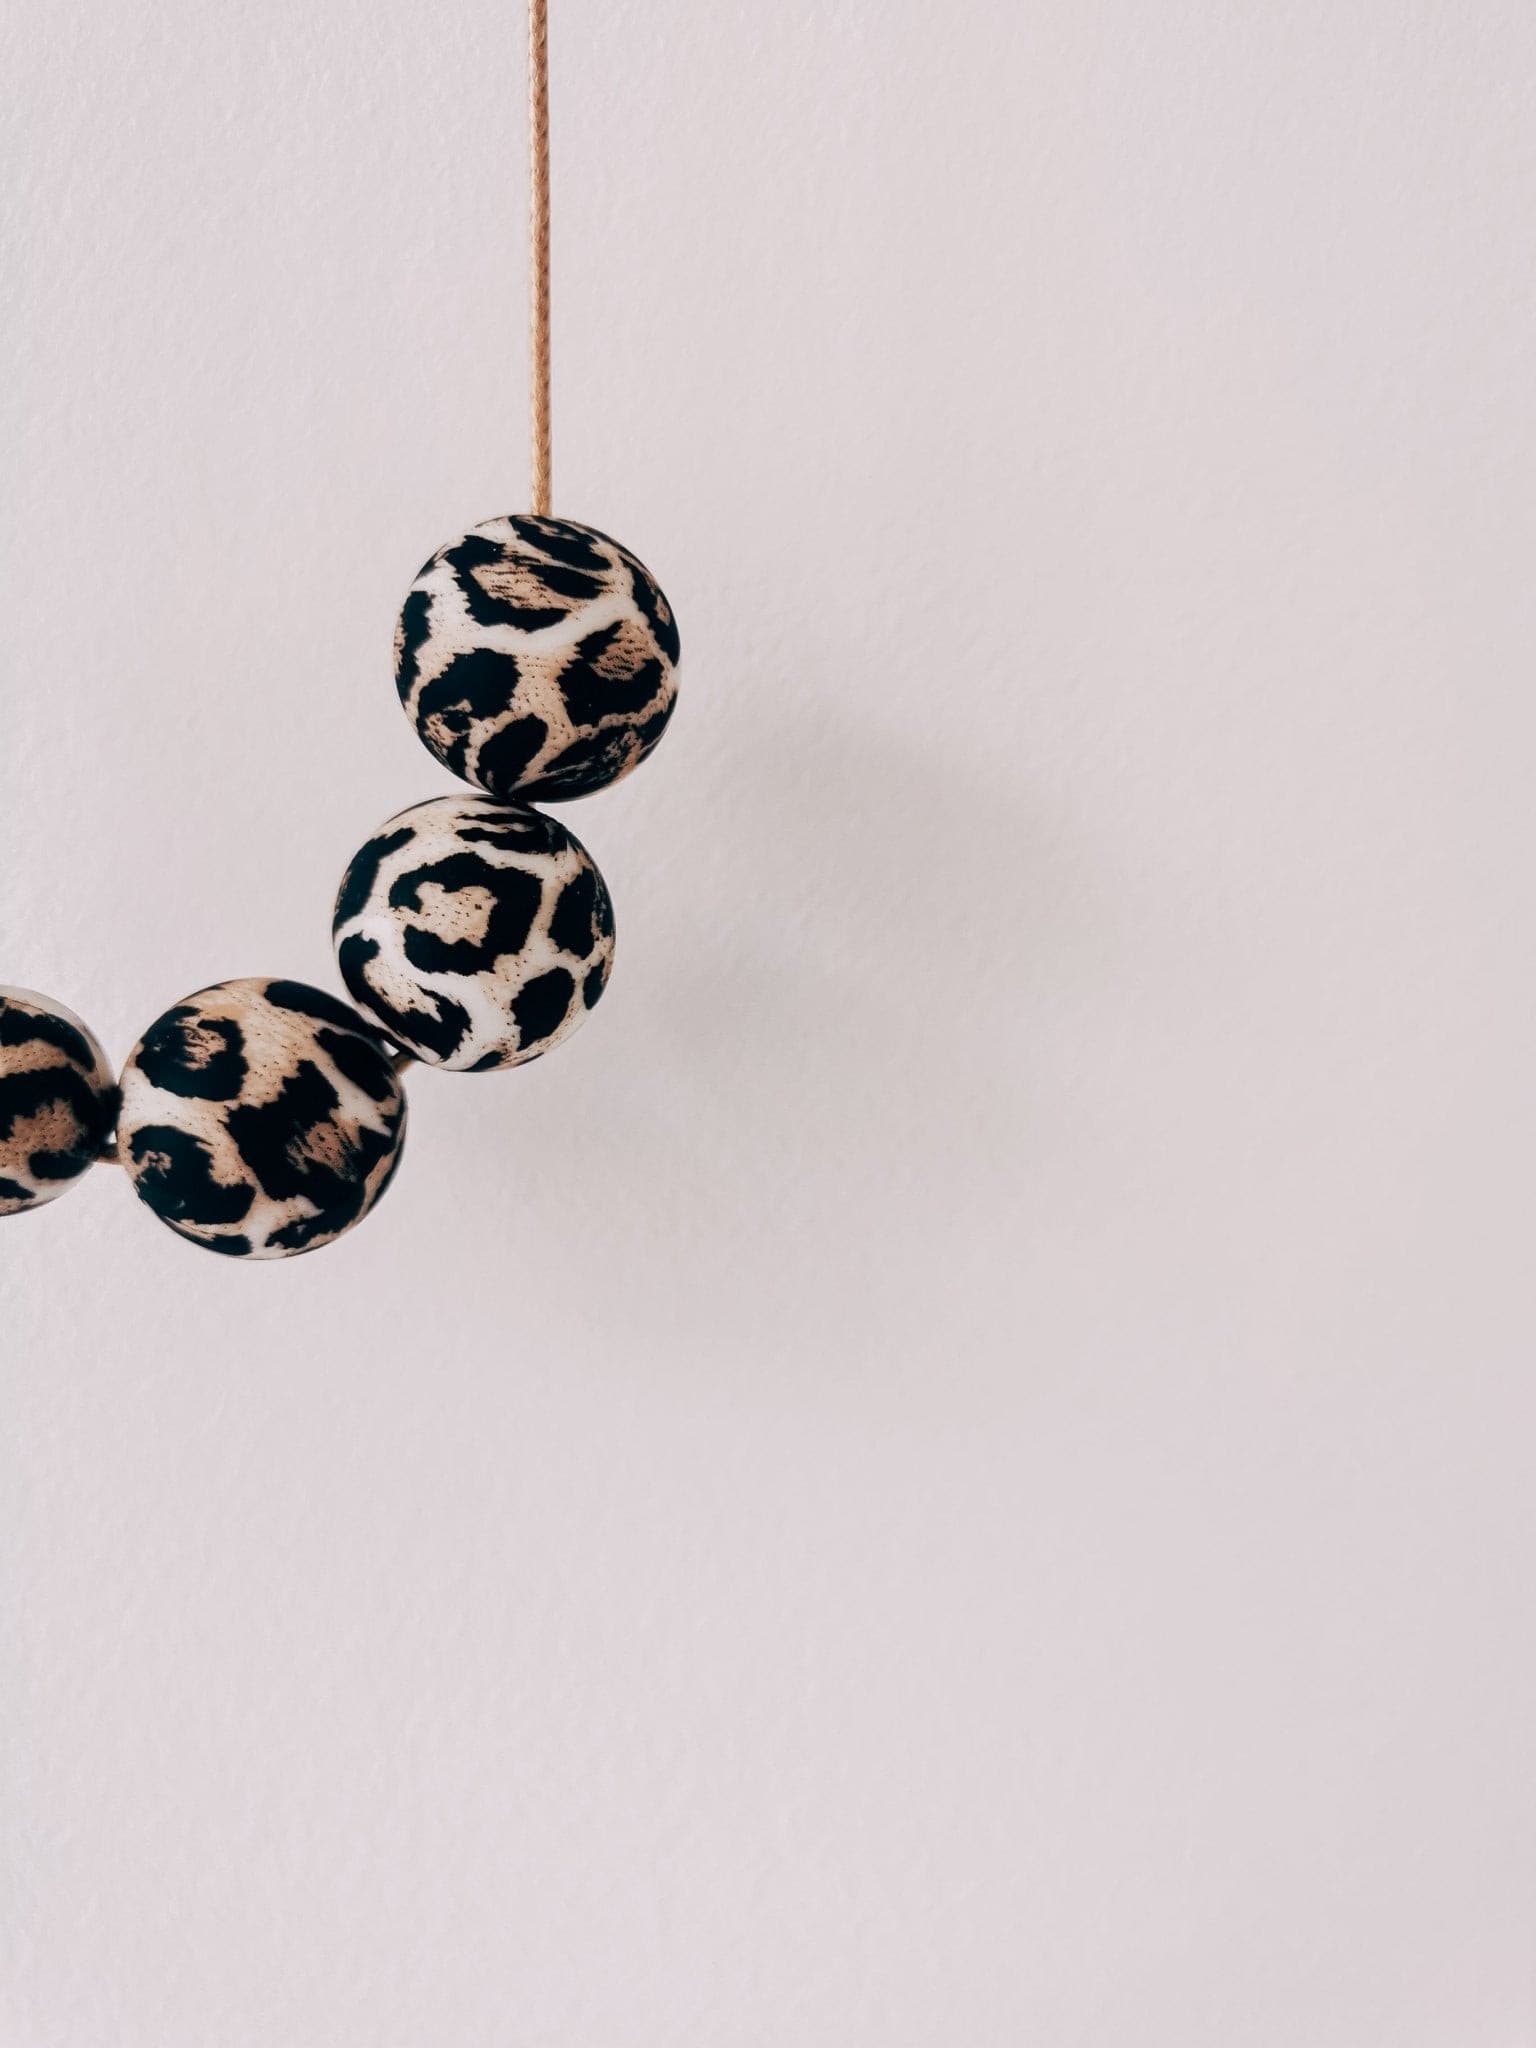 Wild Leopard Necklace image by blossy